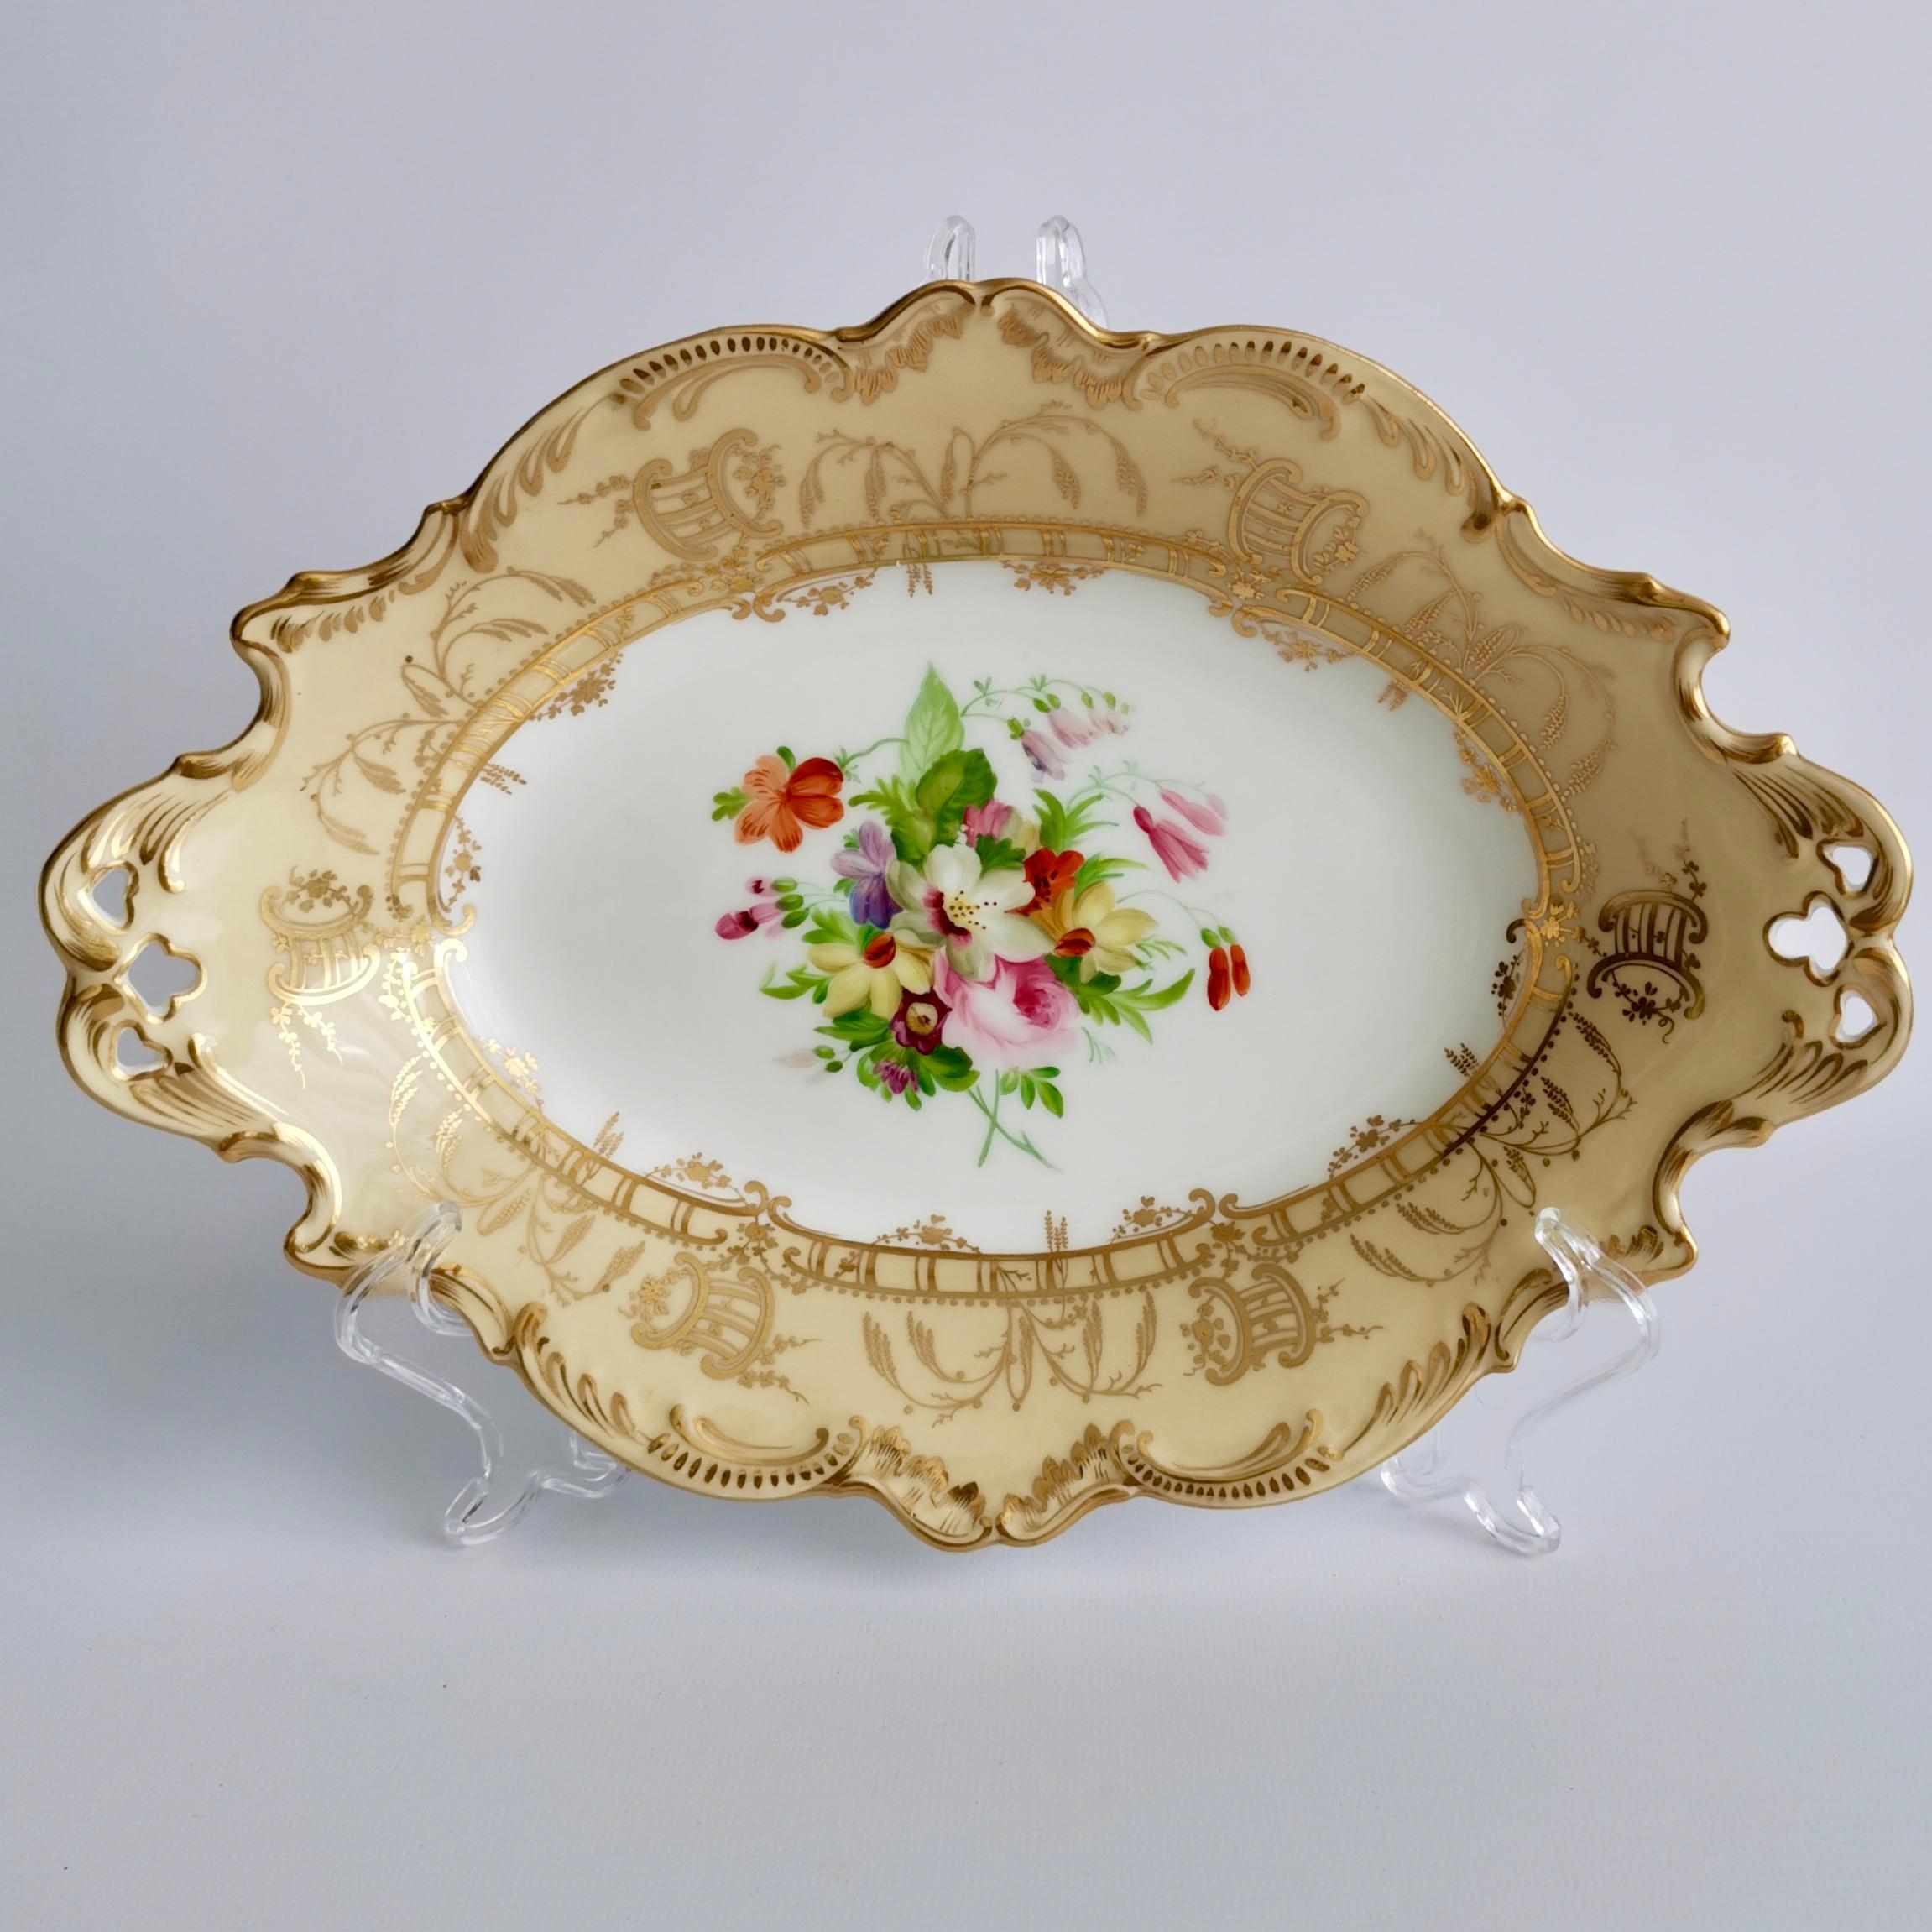 English Coalport Set of 2 Oval Dessert Dishes, Beige with Flowers by Thomas Dixon, 1847